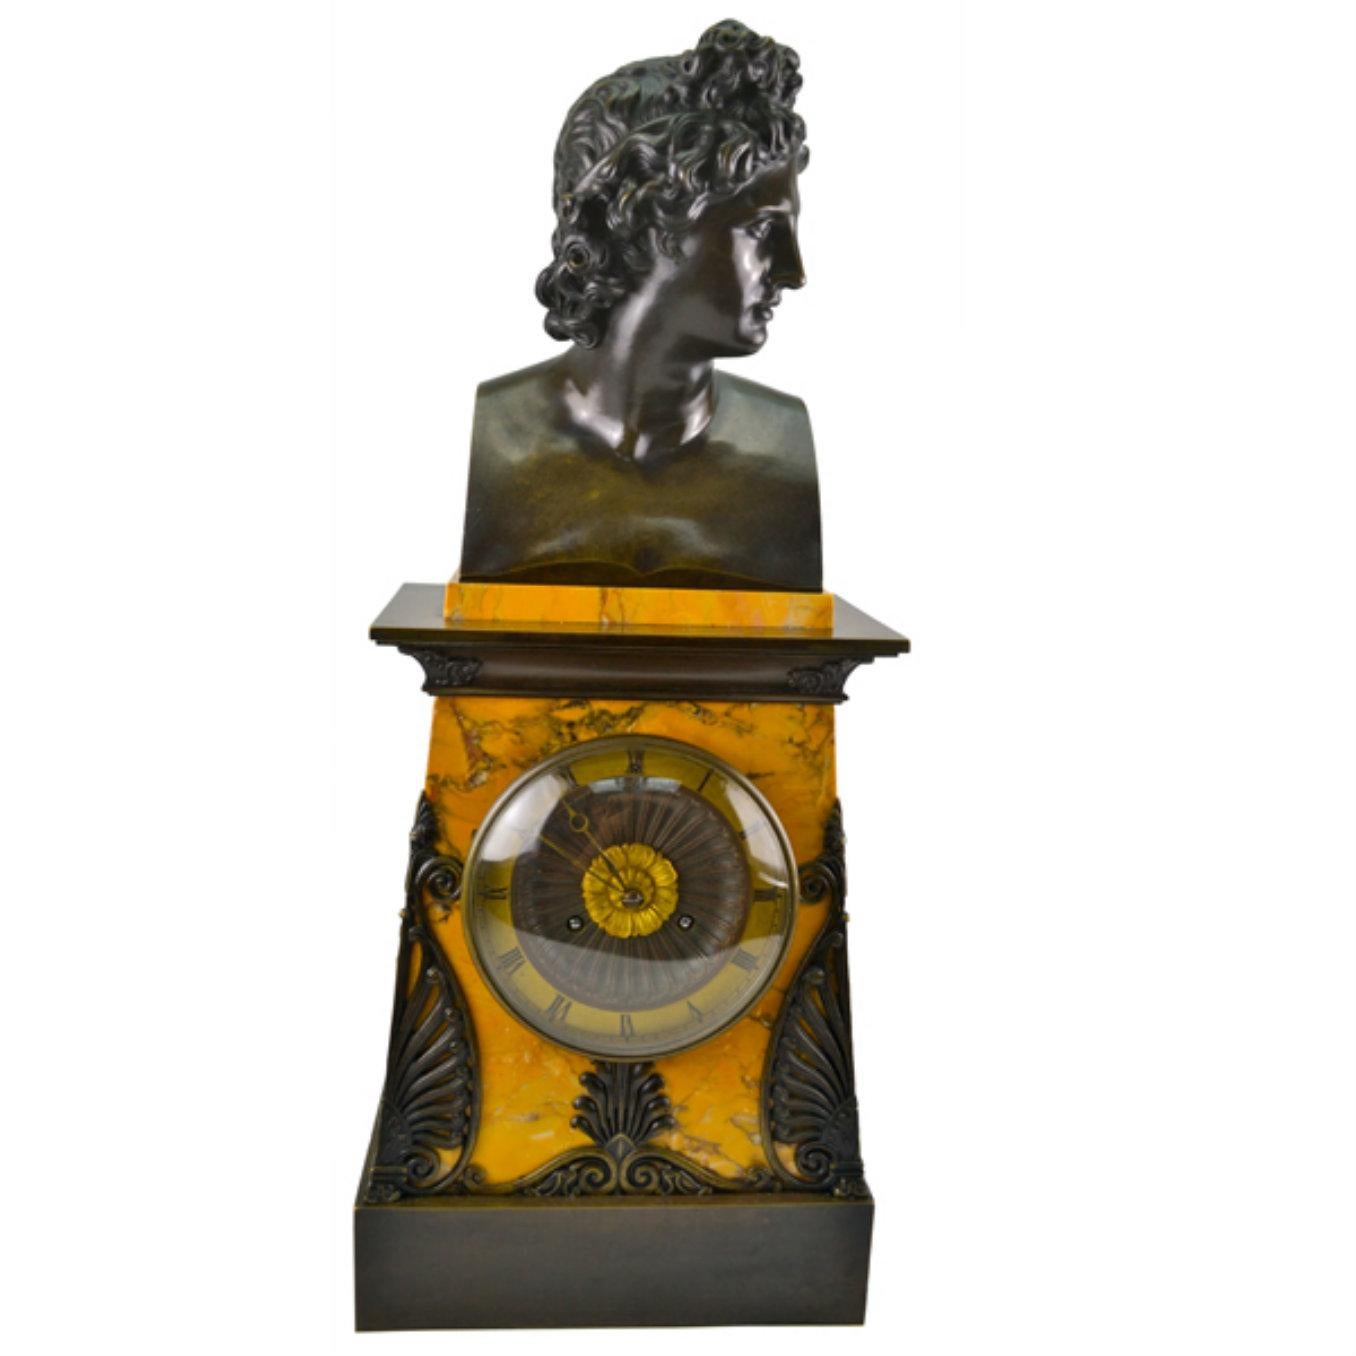 A fine example of a French Empire period mantle clock, circa 1830. The rectangular stepped case is made of yellow Sienna marble and is decorated on the top and bottom with patinated bronze. Atop the clock case sits a very well chased patinated